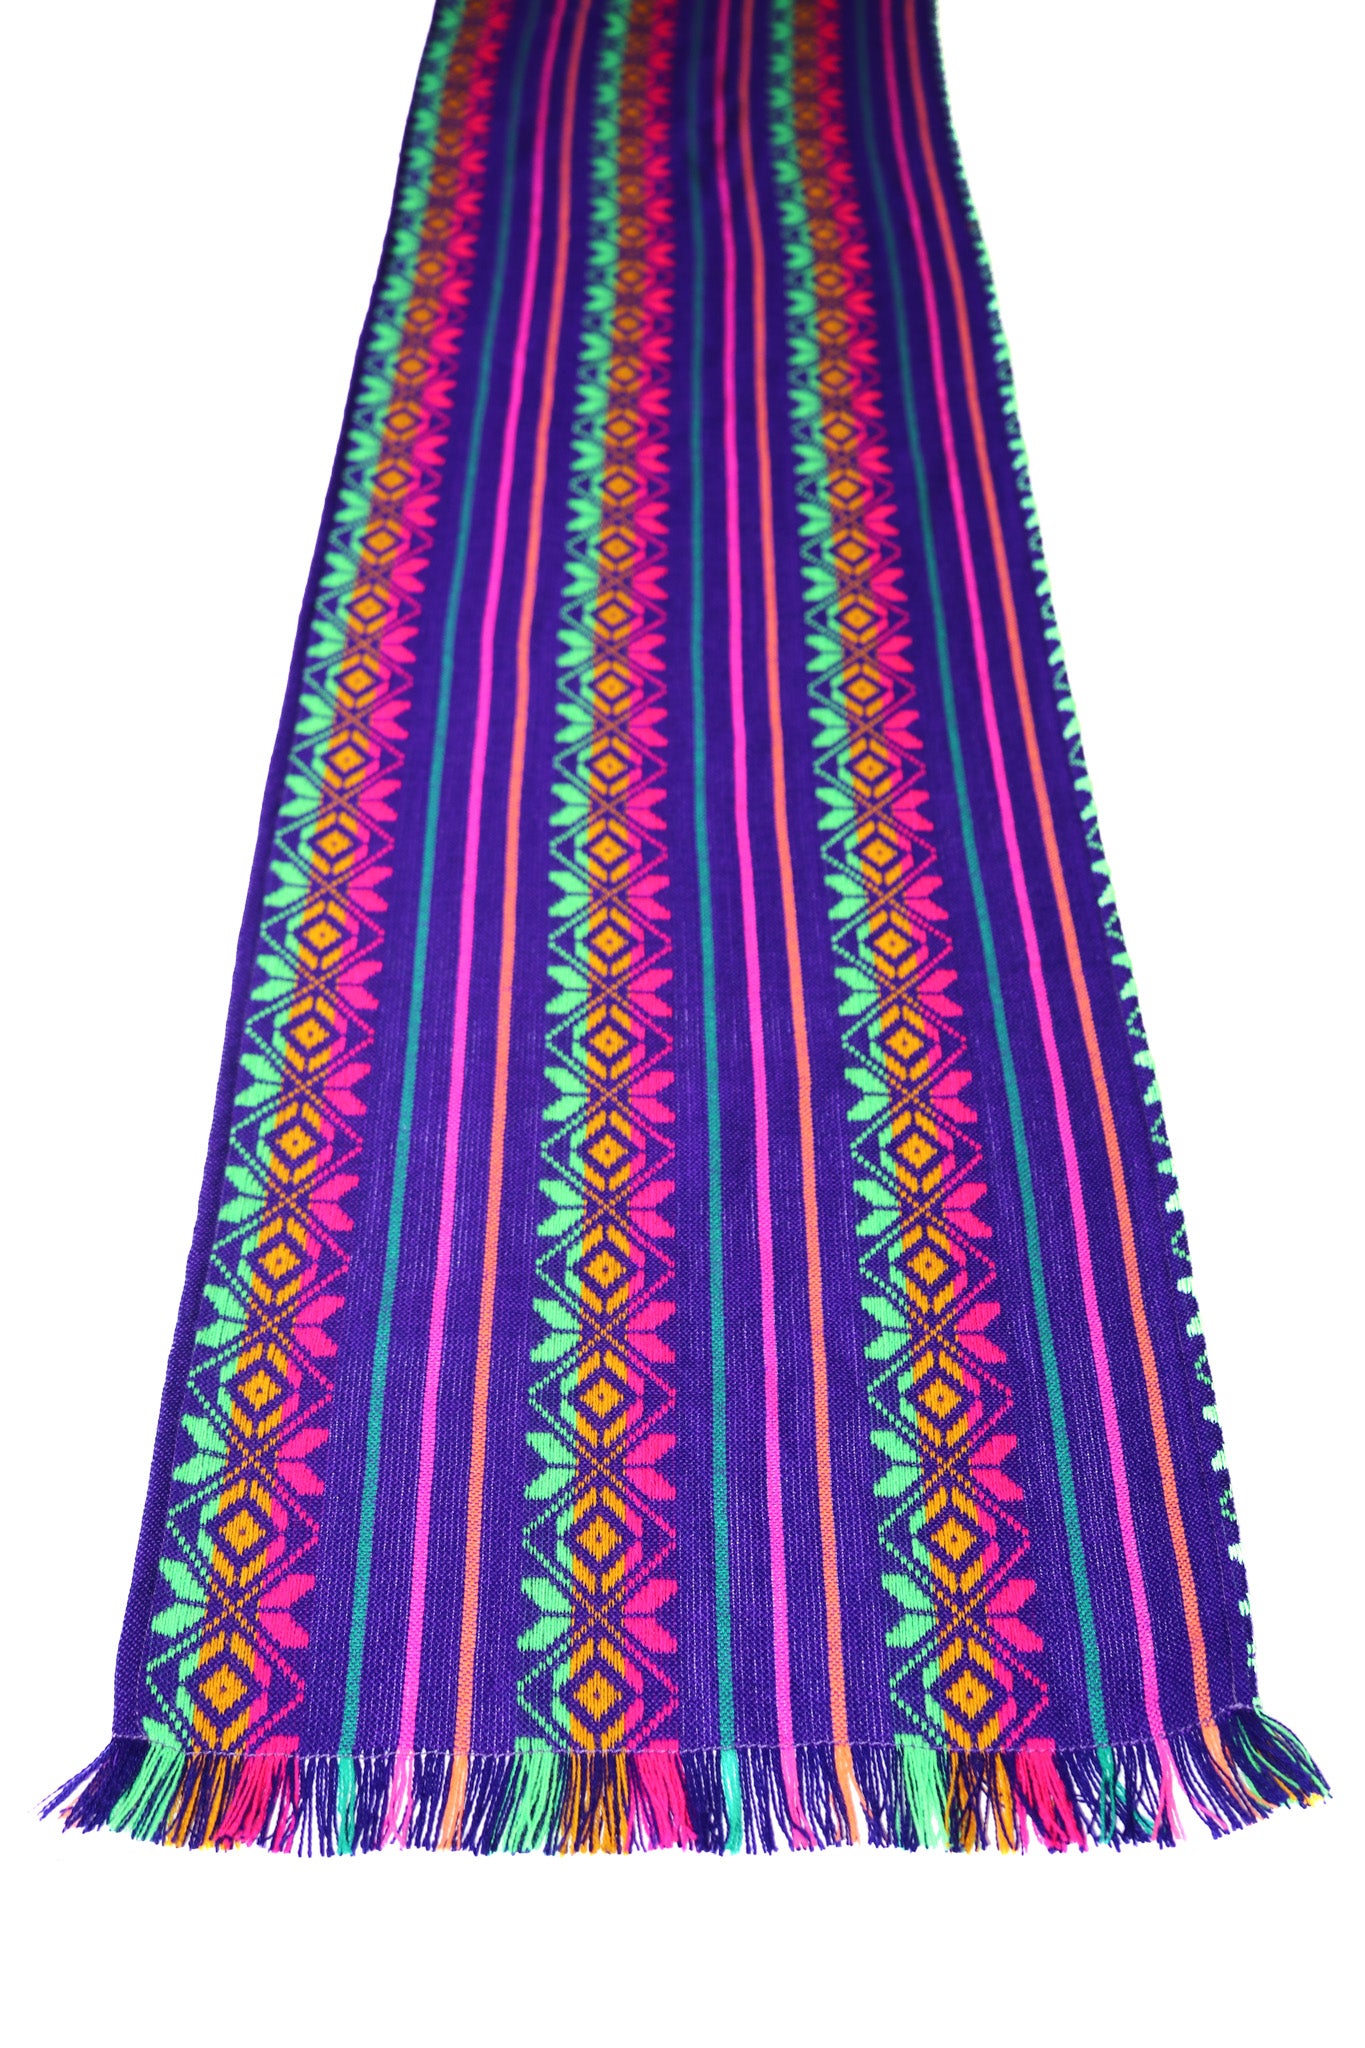 Mexican Fabric Table Runner - Bright purple